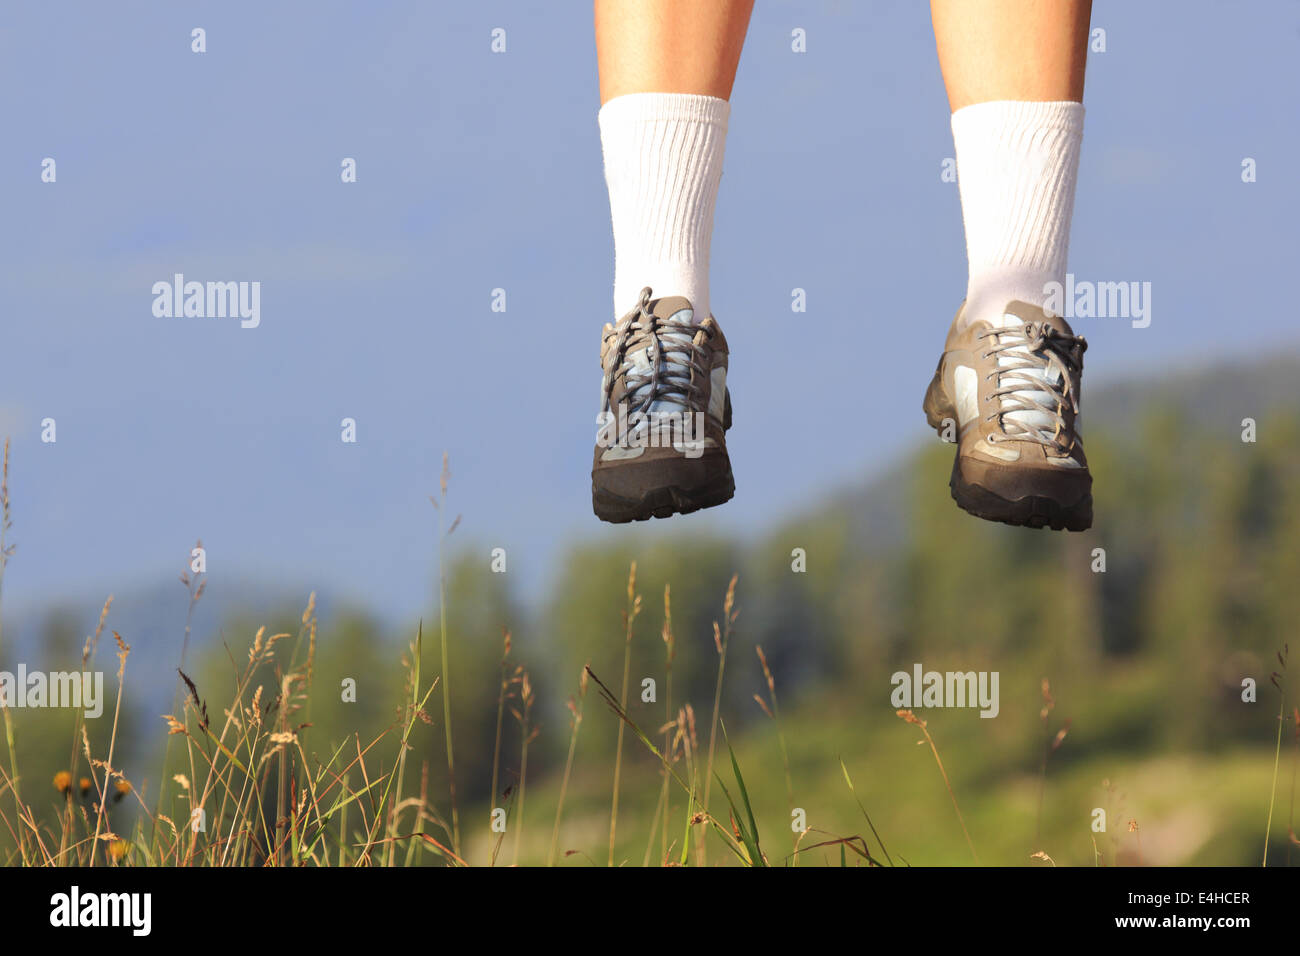 Jumping with sport shoes in summer season Stock Photo - Alamy